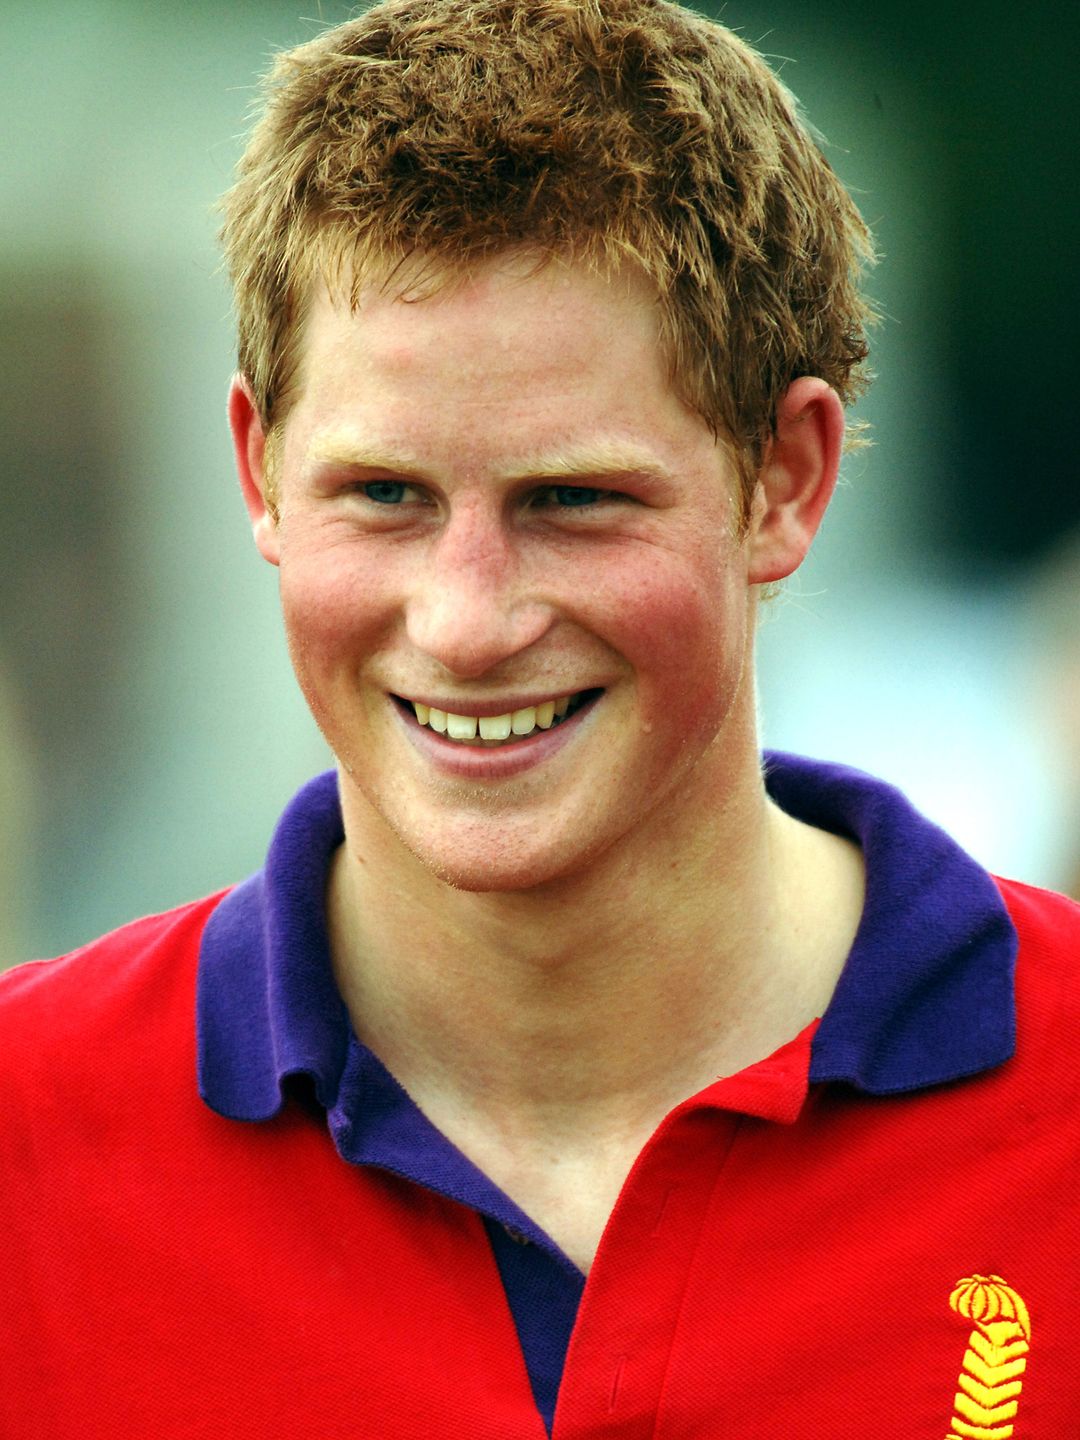 A Young Prince Harry is often cited as inspo for the viral 'Boyfriend Blush' trend